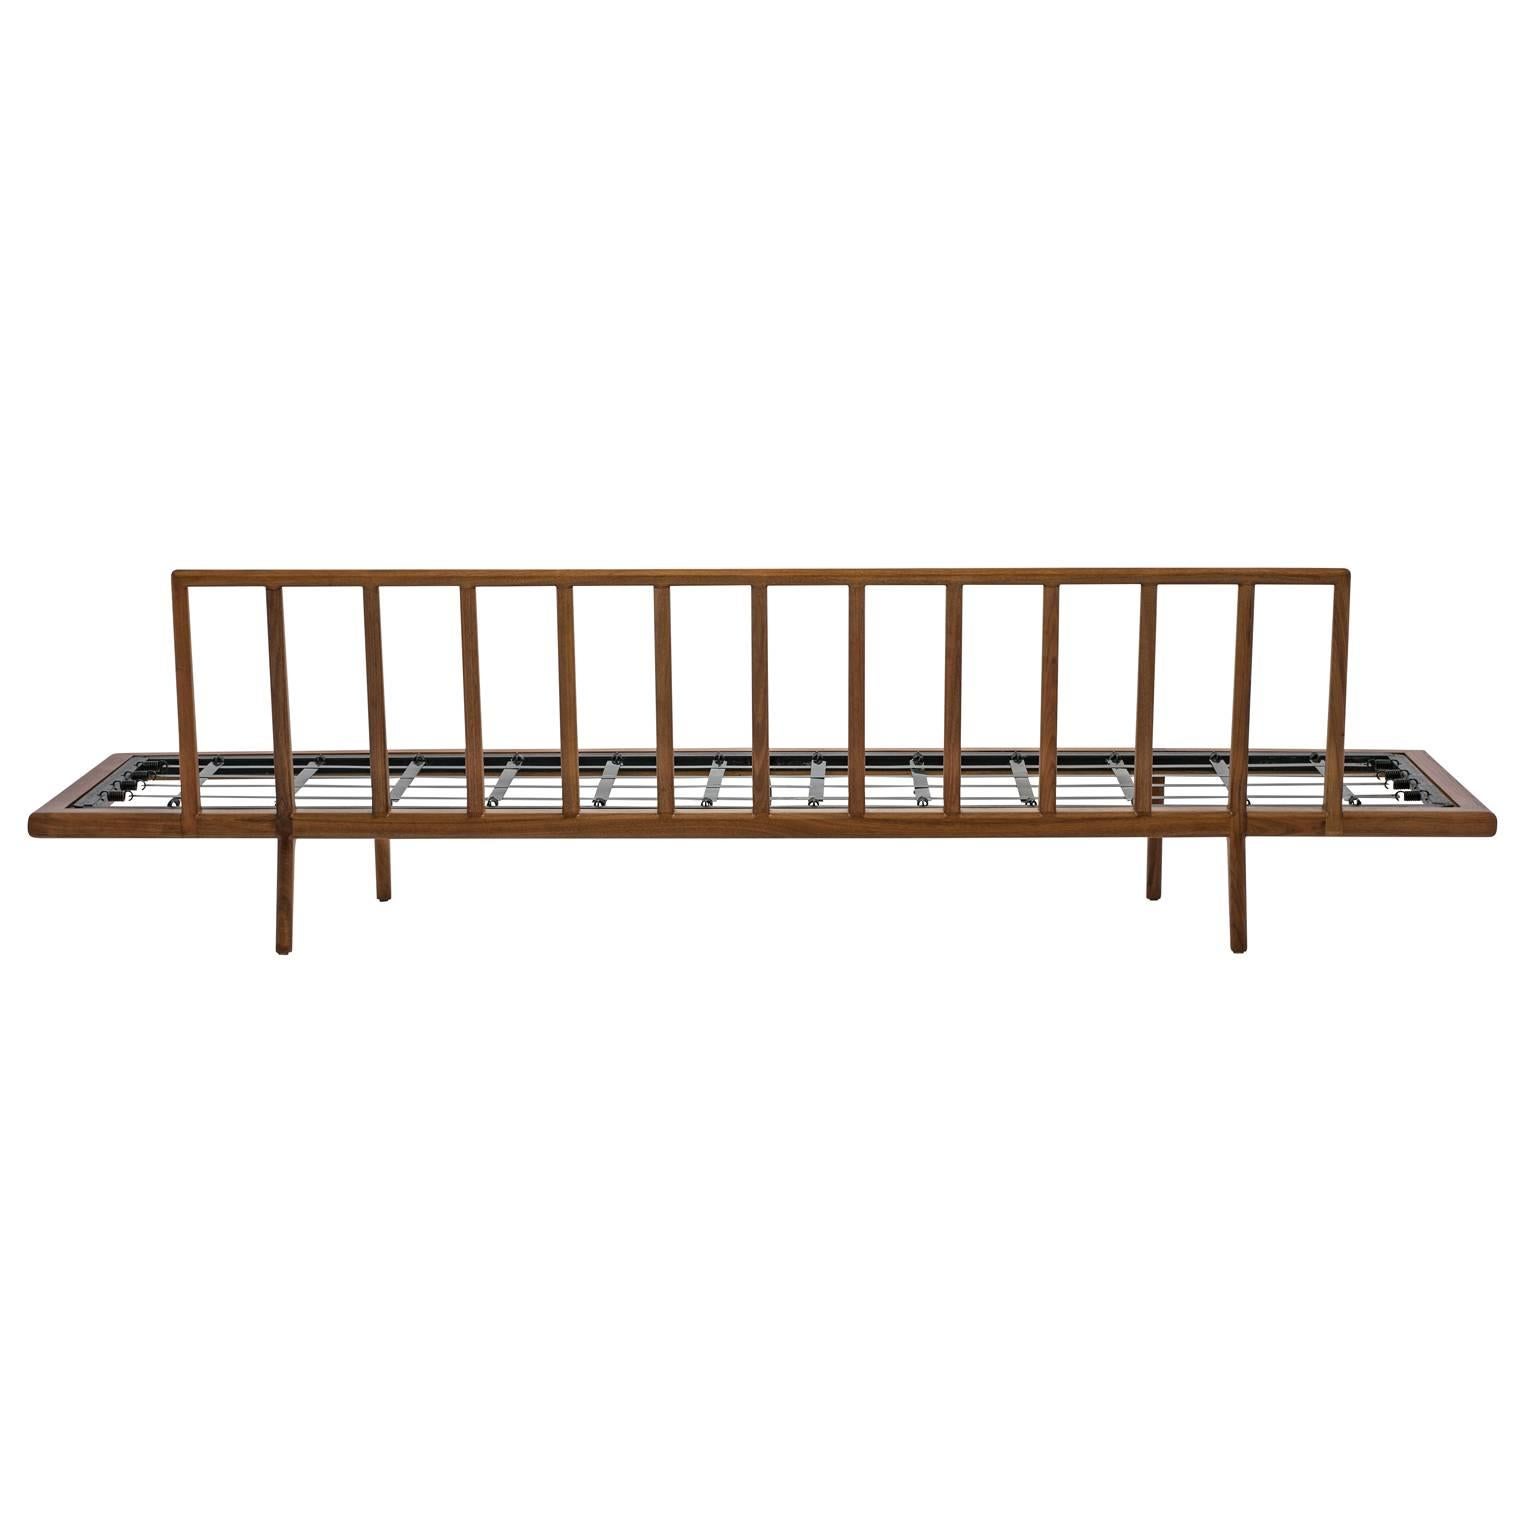 Long, low and sleek Mid-Century daybed or sofa frame by Mel Smilow for Smilow-Thielle. Finely crafted, this walnut daybed frame features a modernist rail back with a sprung-metal slat seat support. It has been refinished and is ready for your choice